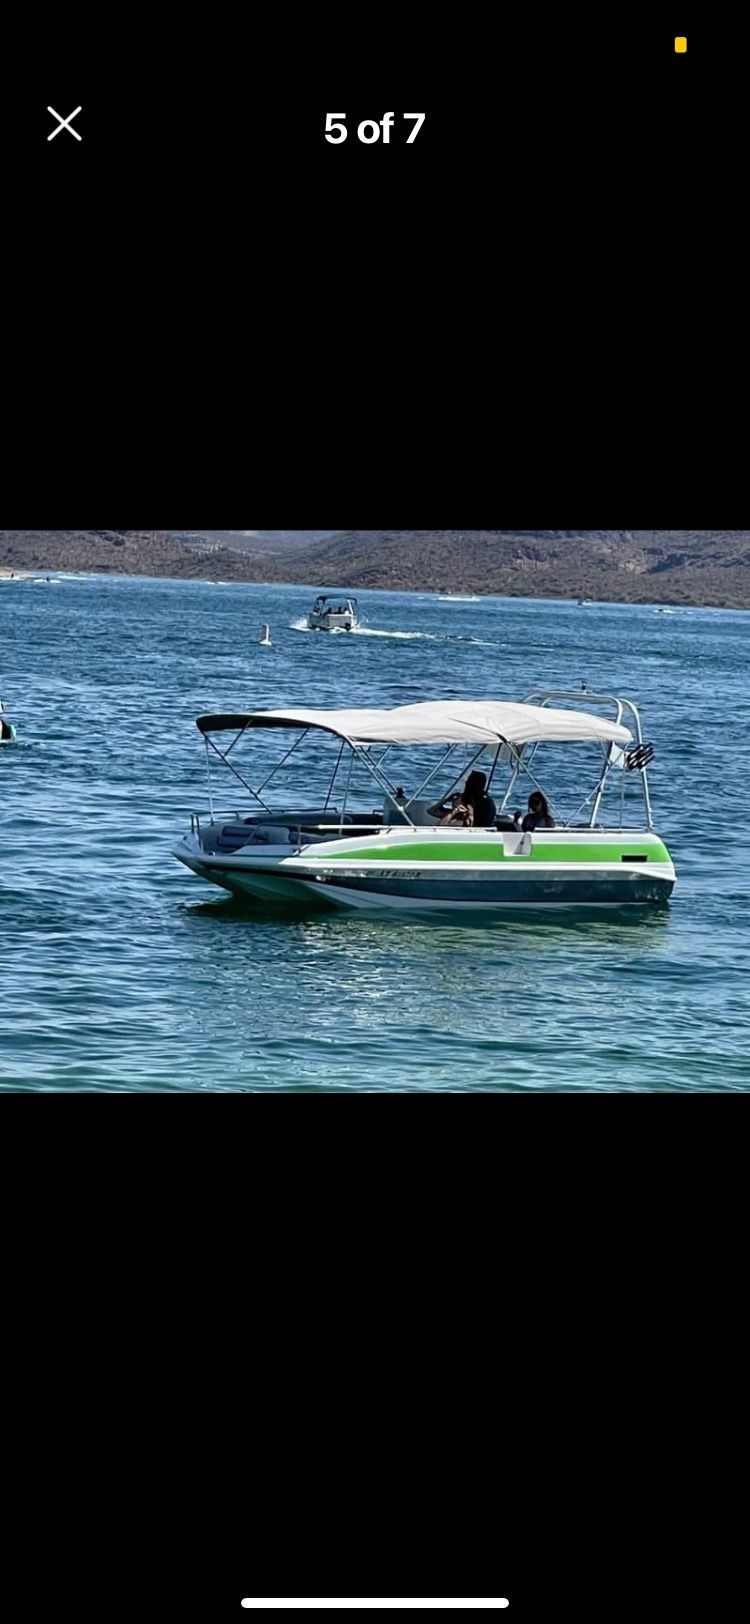 Deck Boat For Sale - $16,500.00 